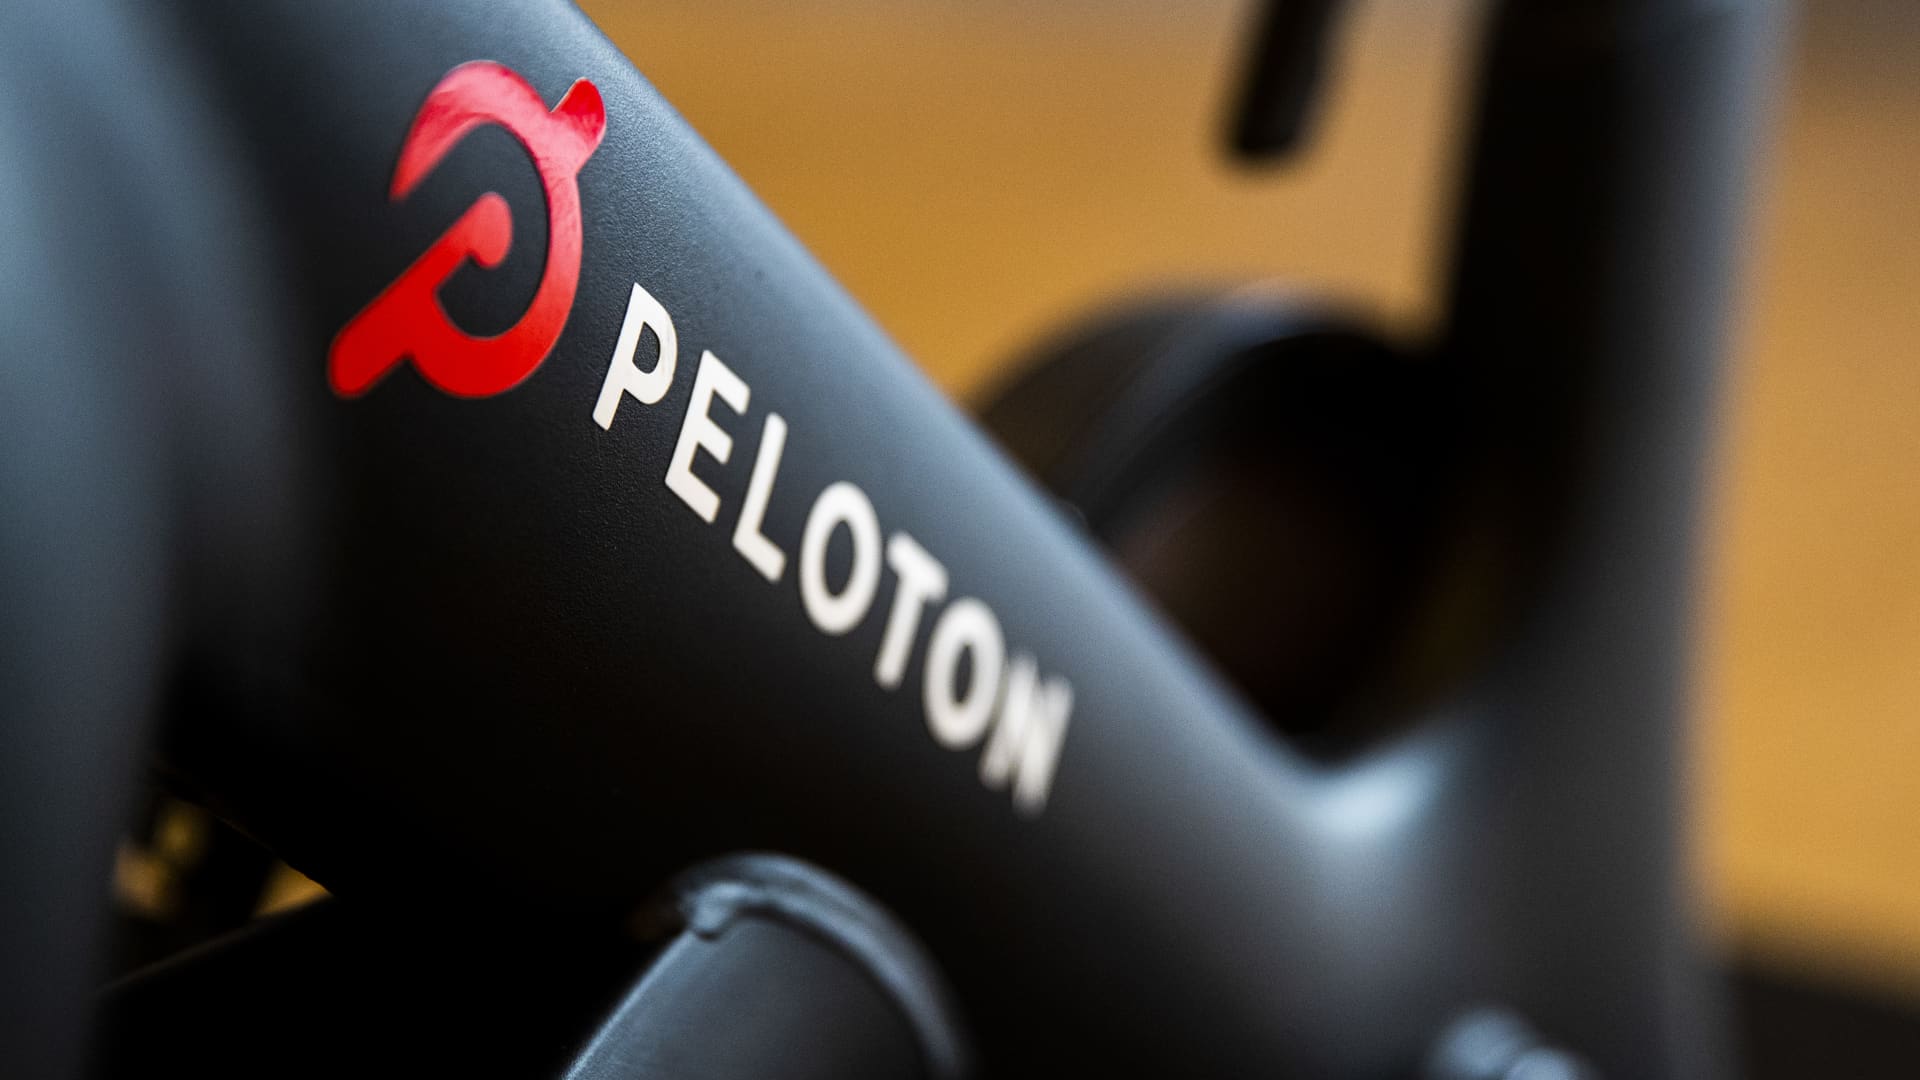 Peloton strikes a deal to sell fitness equipment and apparel on Amazon